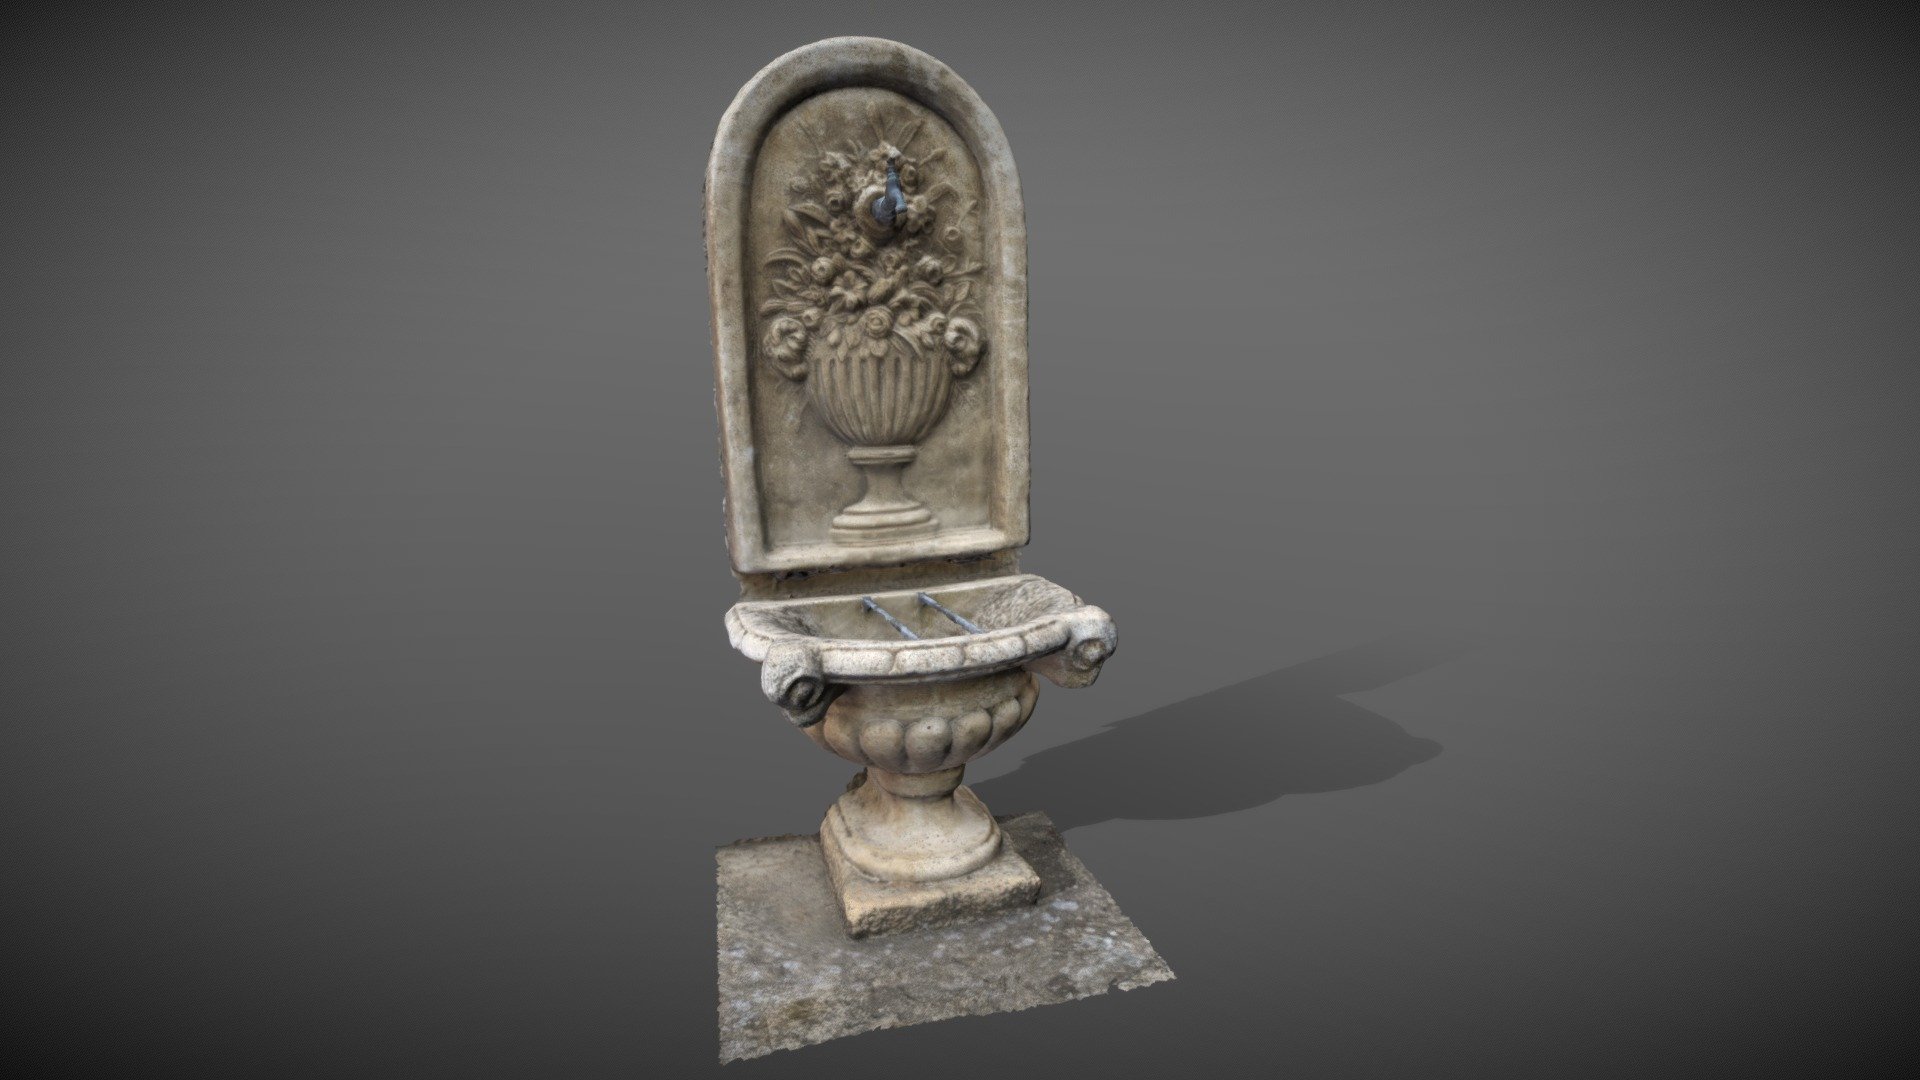 Wall fountain, realized by photogrammetry.
96 images for almost 150 000 faces 3d model